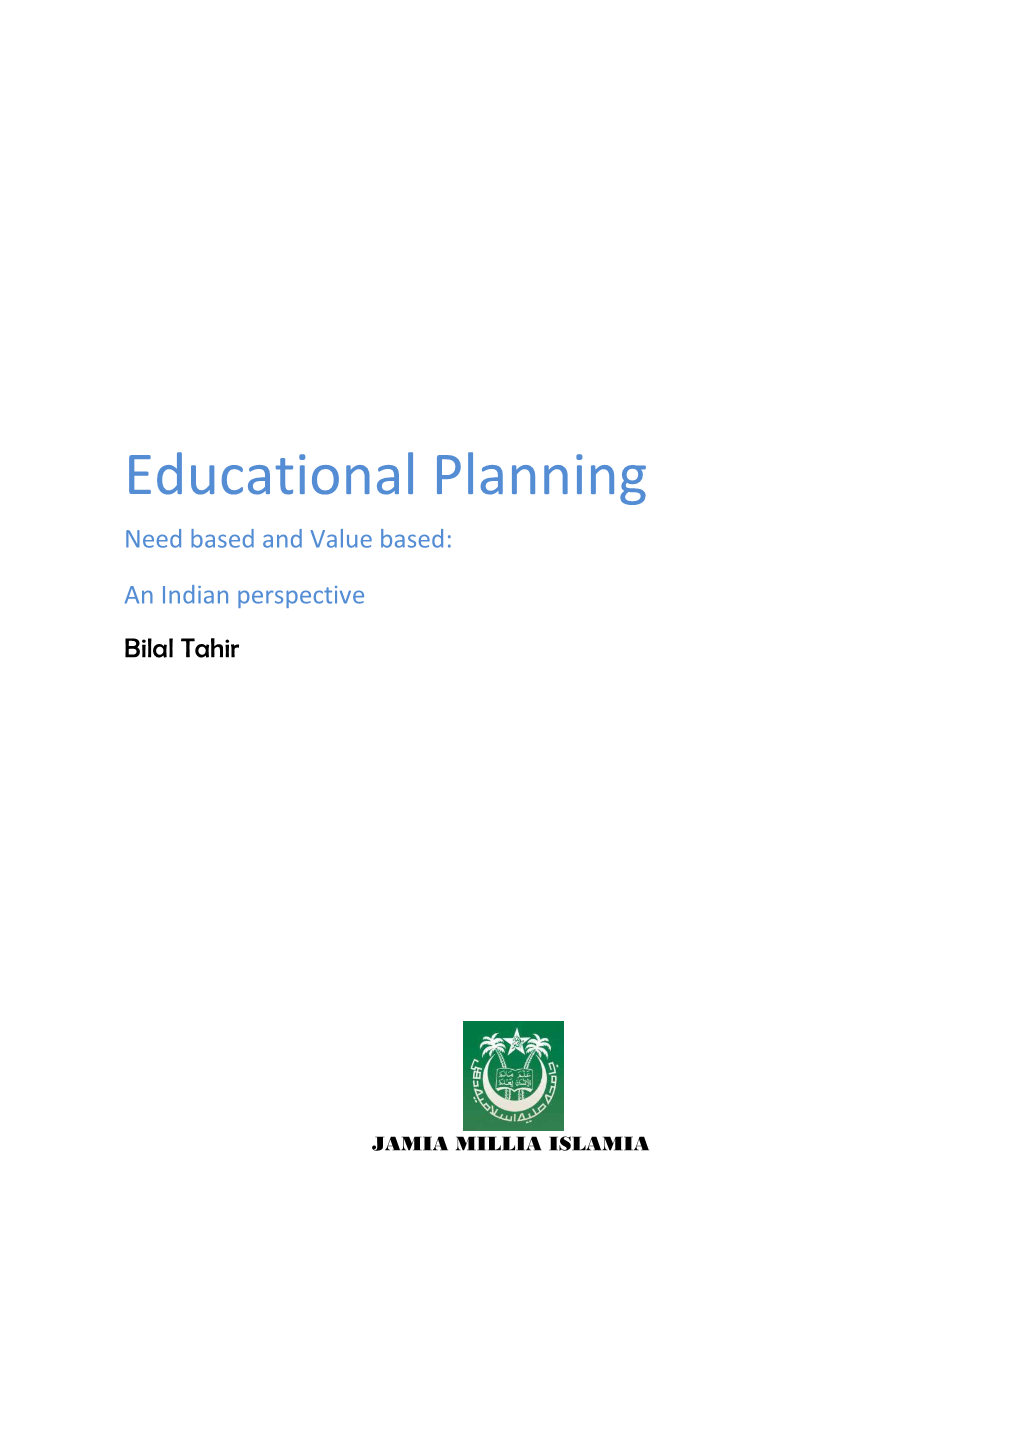 Educational Planning Need Based and Value Based: an Indian Perspective Bilal Tahir